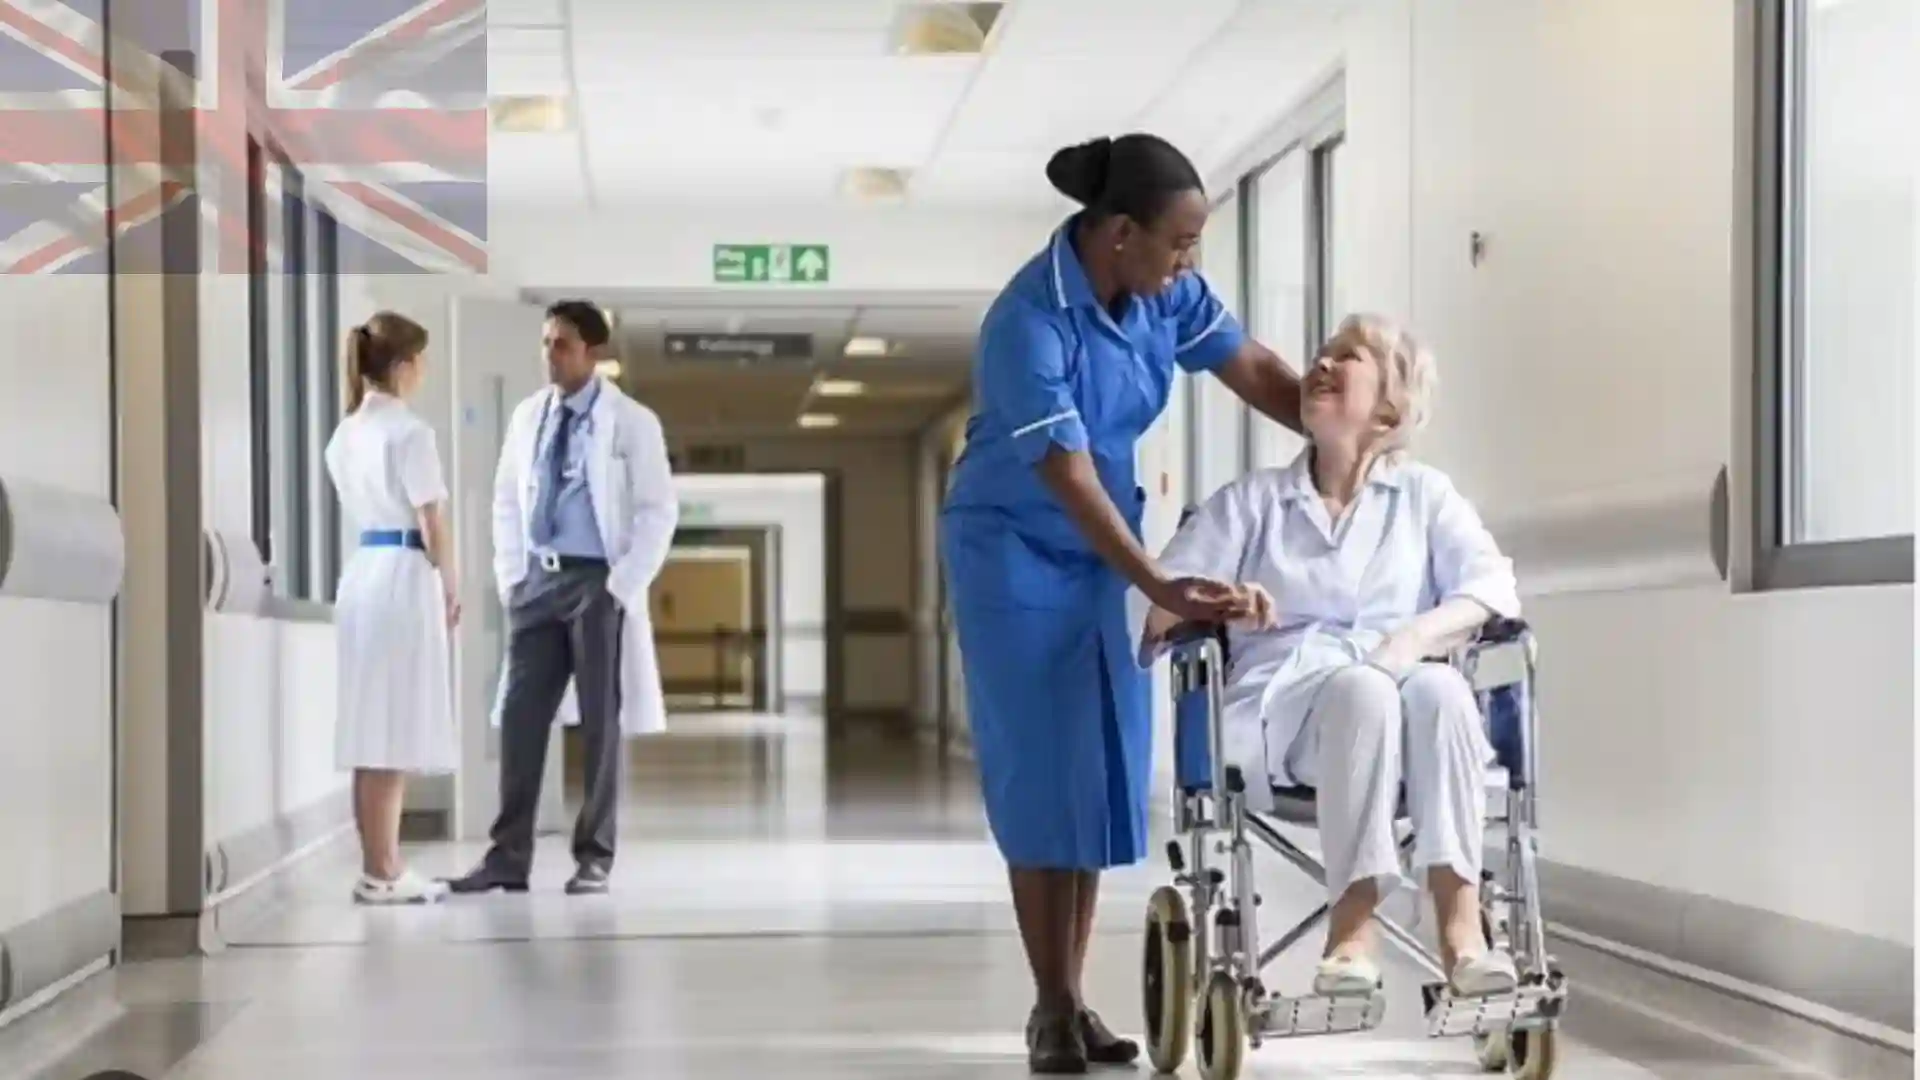 WATCH: British Govt Banning Care Workers From Bringing Over Their Families